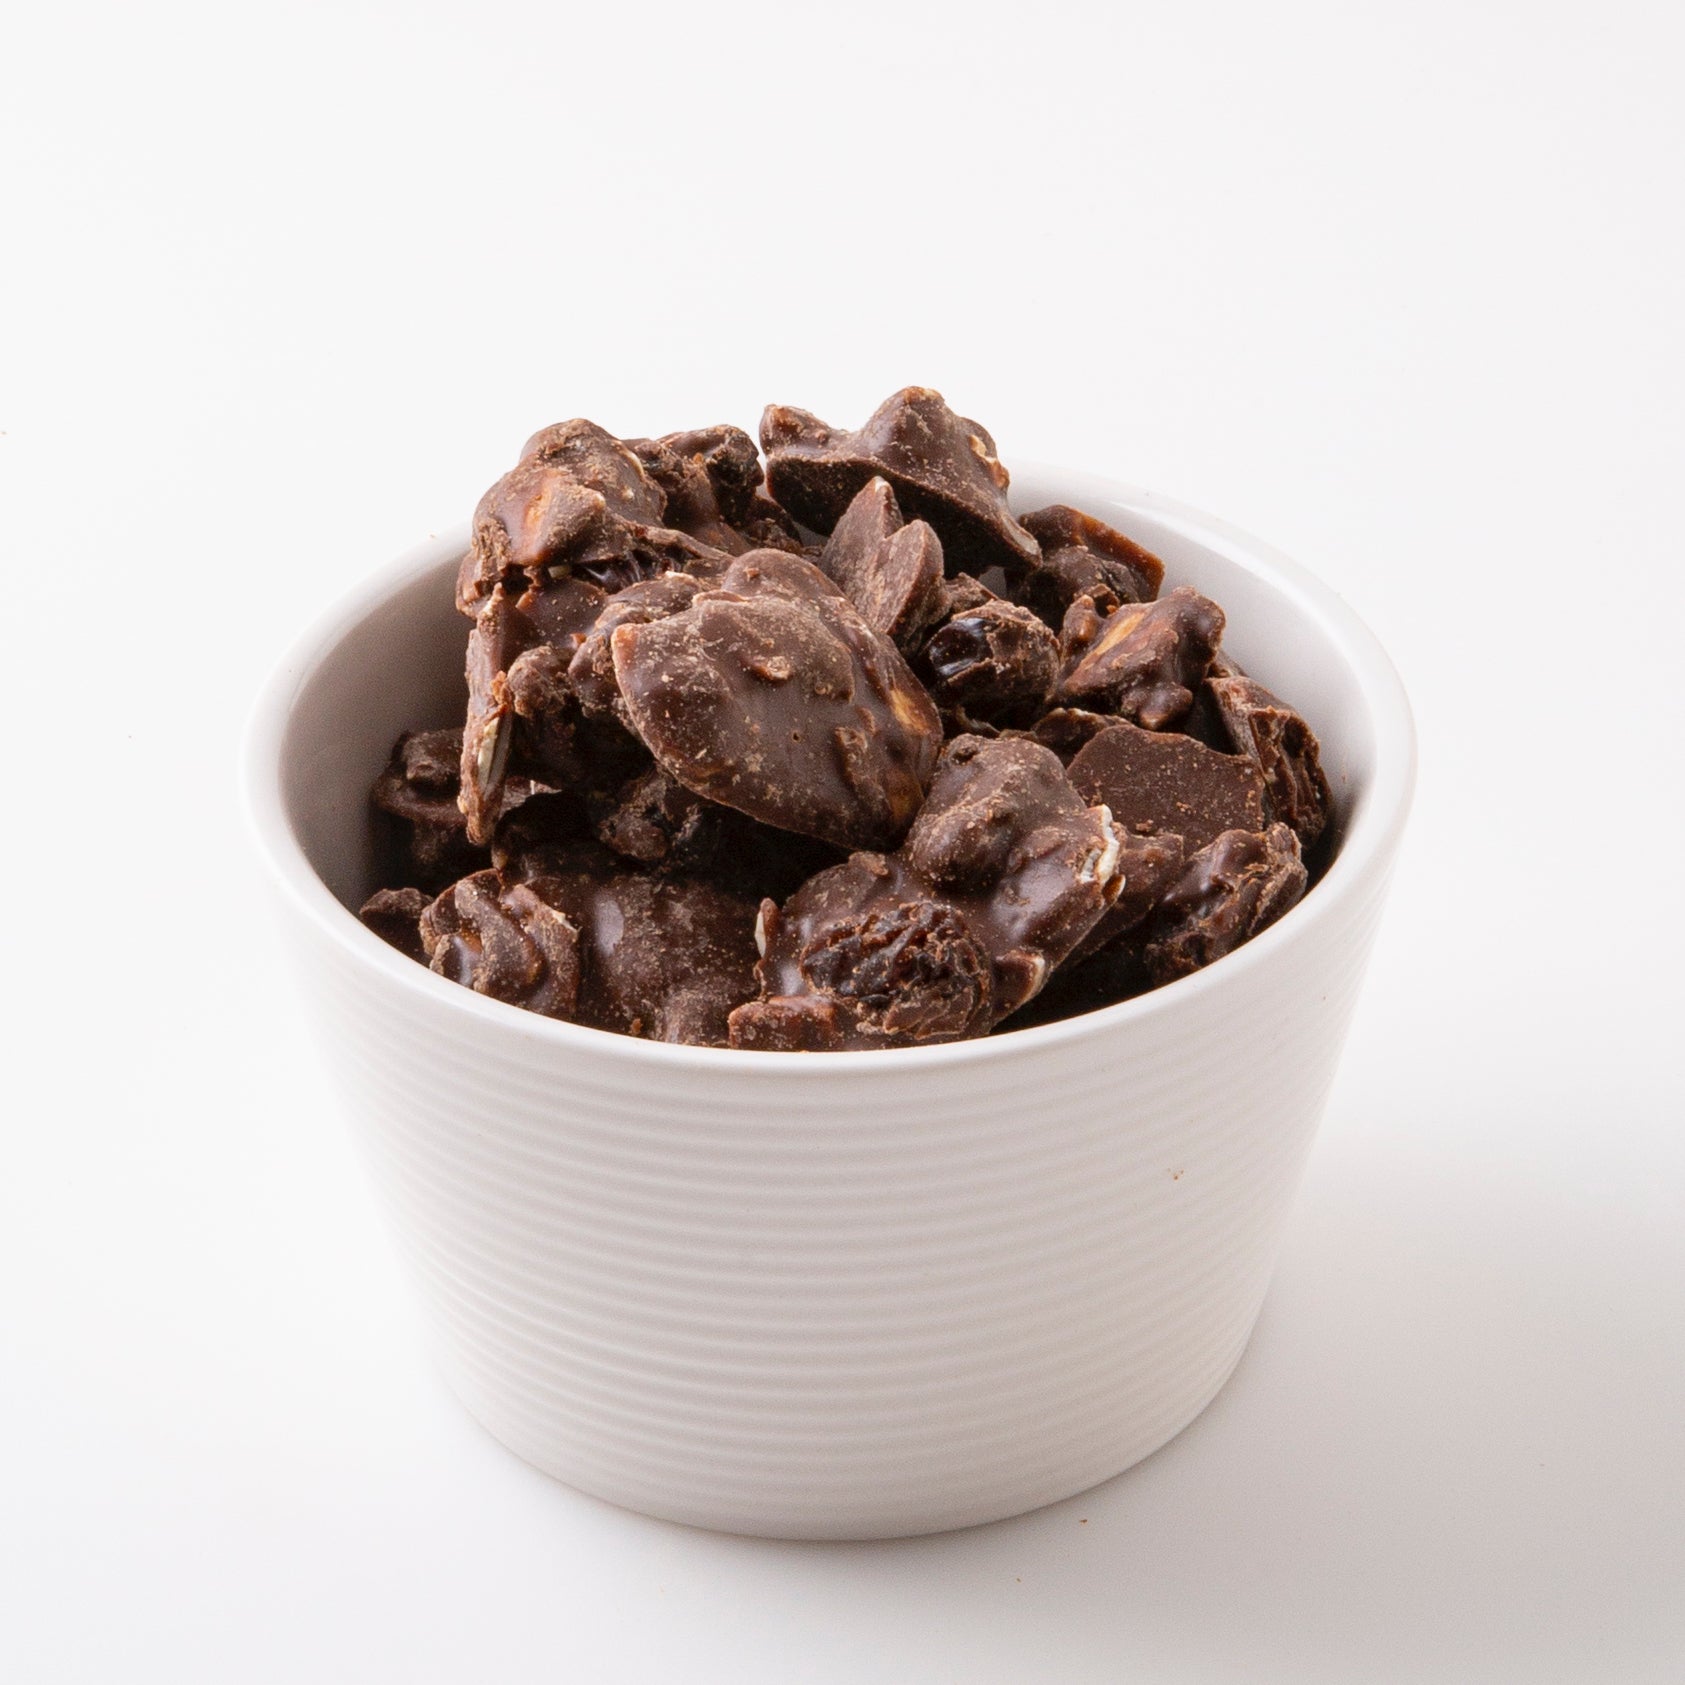 Almond Raisin Carob Clusters in a Bowl - Naked Foods